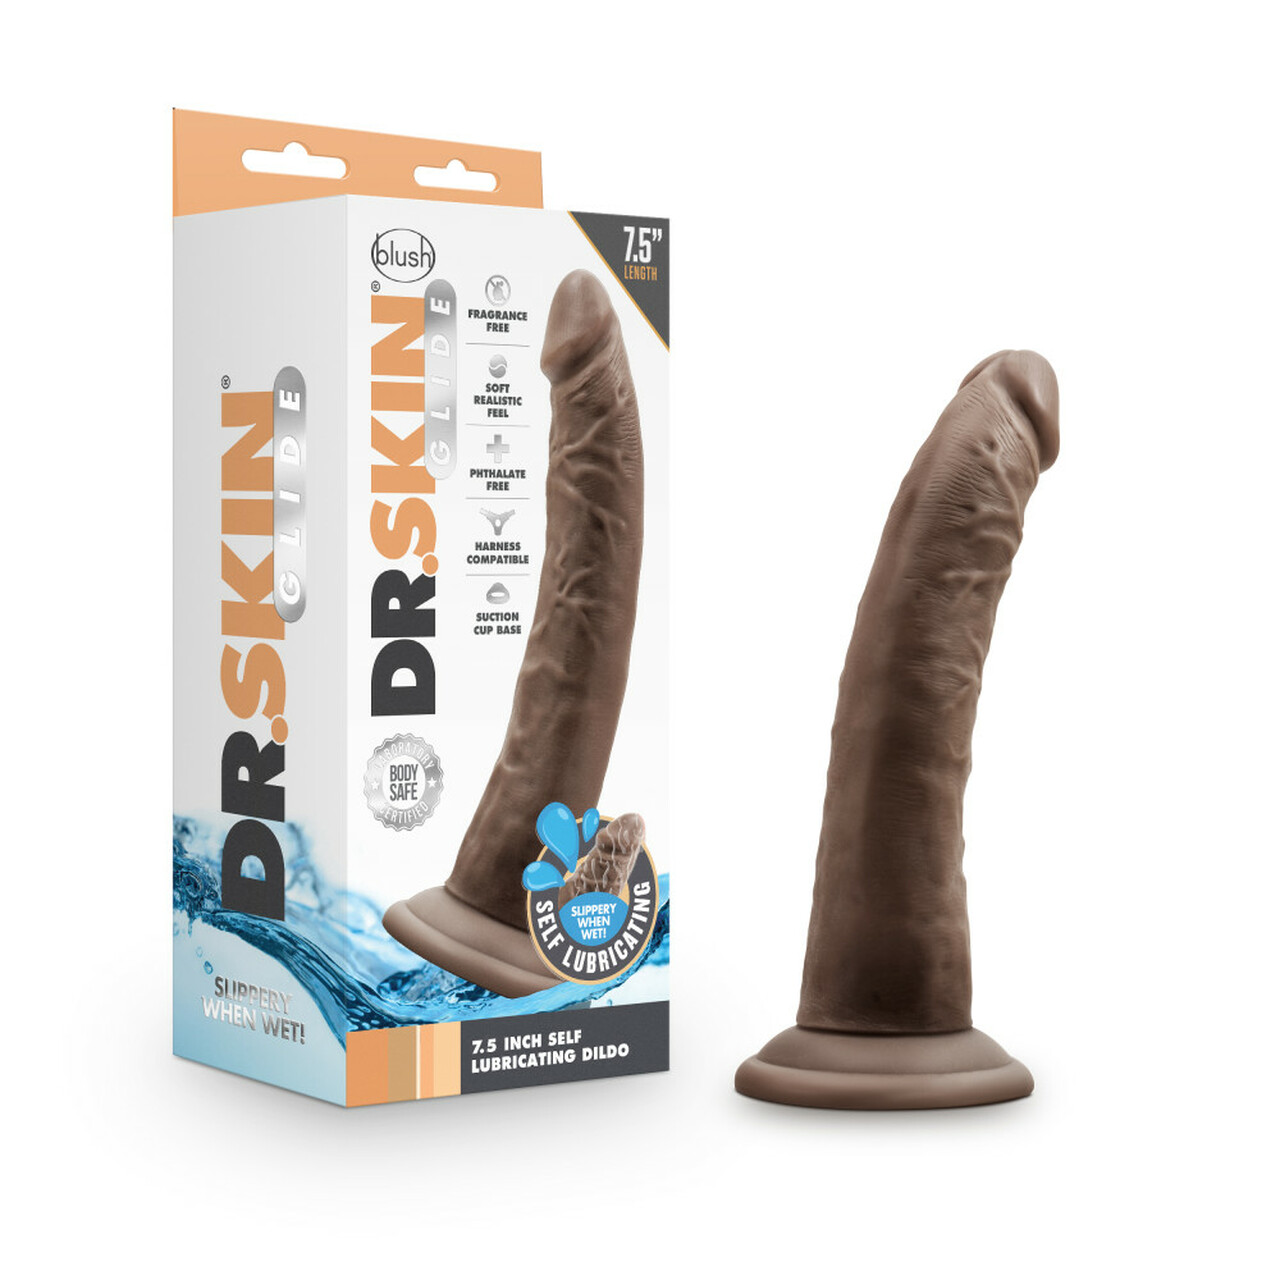 DR SKIN GLIDE 7.5IN SELF LUBRICATING DILDO CHOCOLATE - Click Image to Close